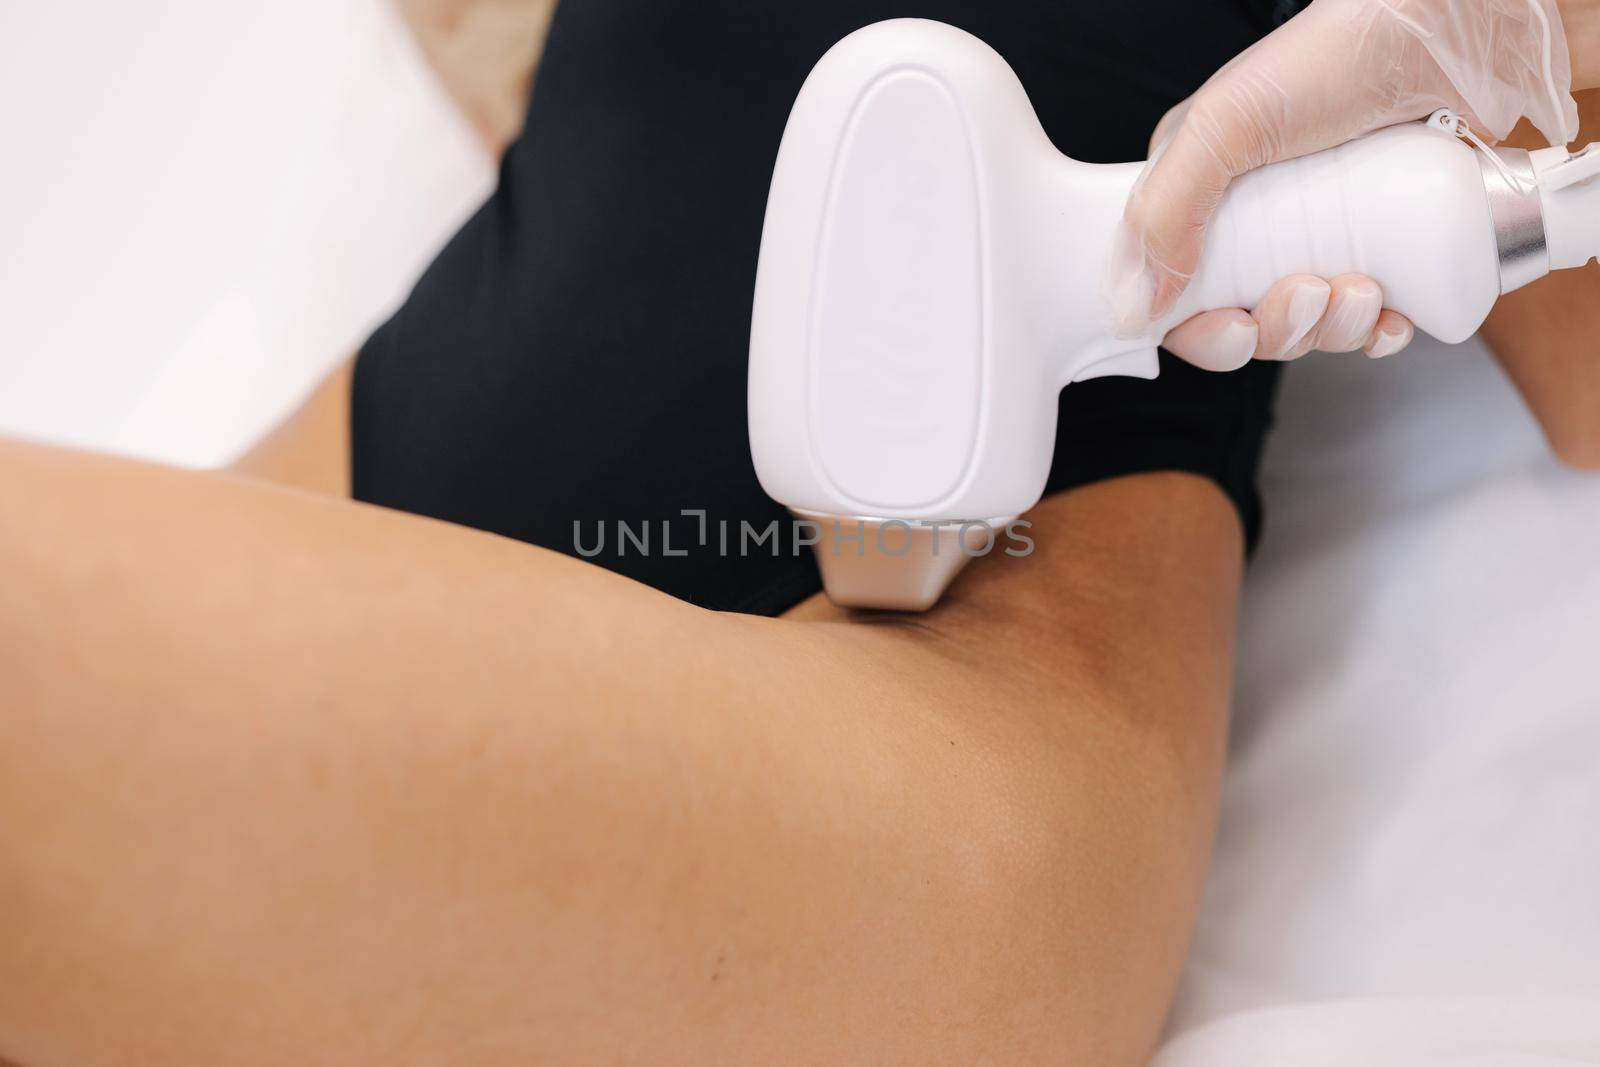 Cosmetology. Beautiful woman receiving laser hair removal procedure at beauty salon. Beautician doing beauty treatment for female arm at spa salon. Protective glasses. Close-up of bikini area.